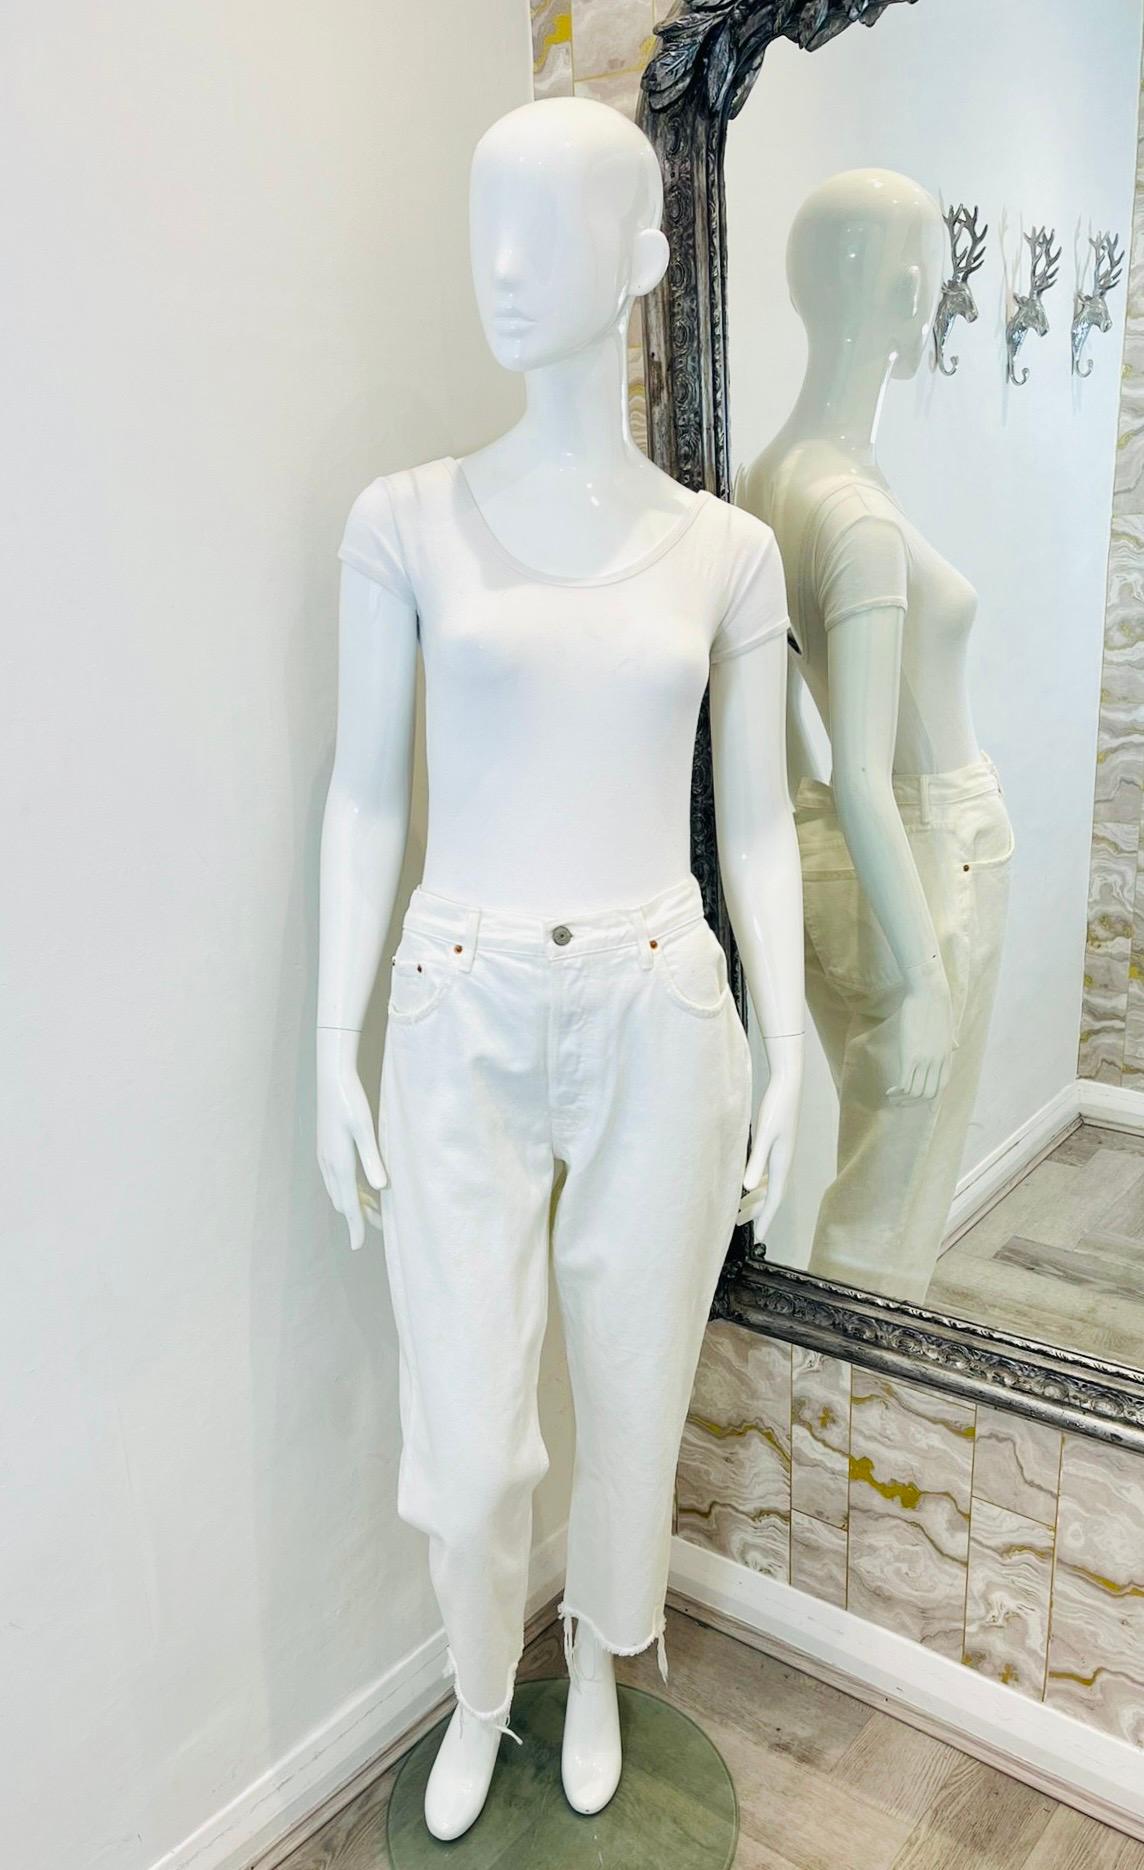 Grlfrnd Cropped Cotton Jeans

White 'Karolina' jeans designed with cropped leg and high-rise.

Detailed with frayed raw hem and straight fit. Rrp £213

Size –  31W - L

Condition – Very Good

Composition – 100% Cotton